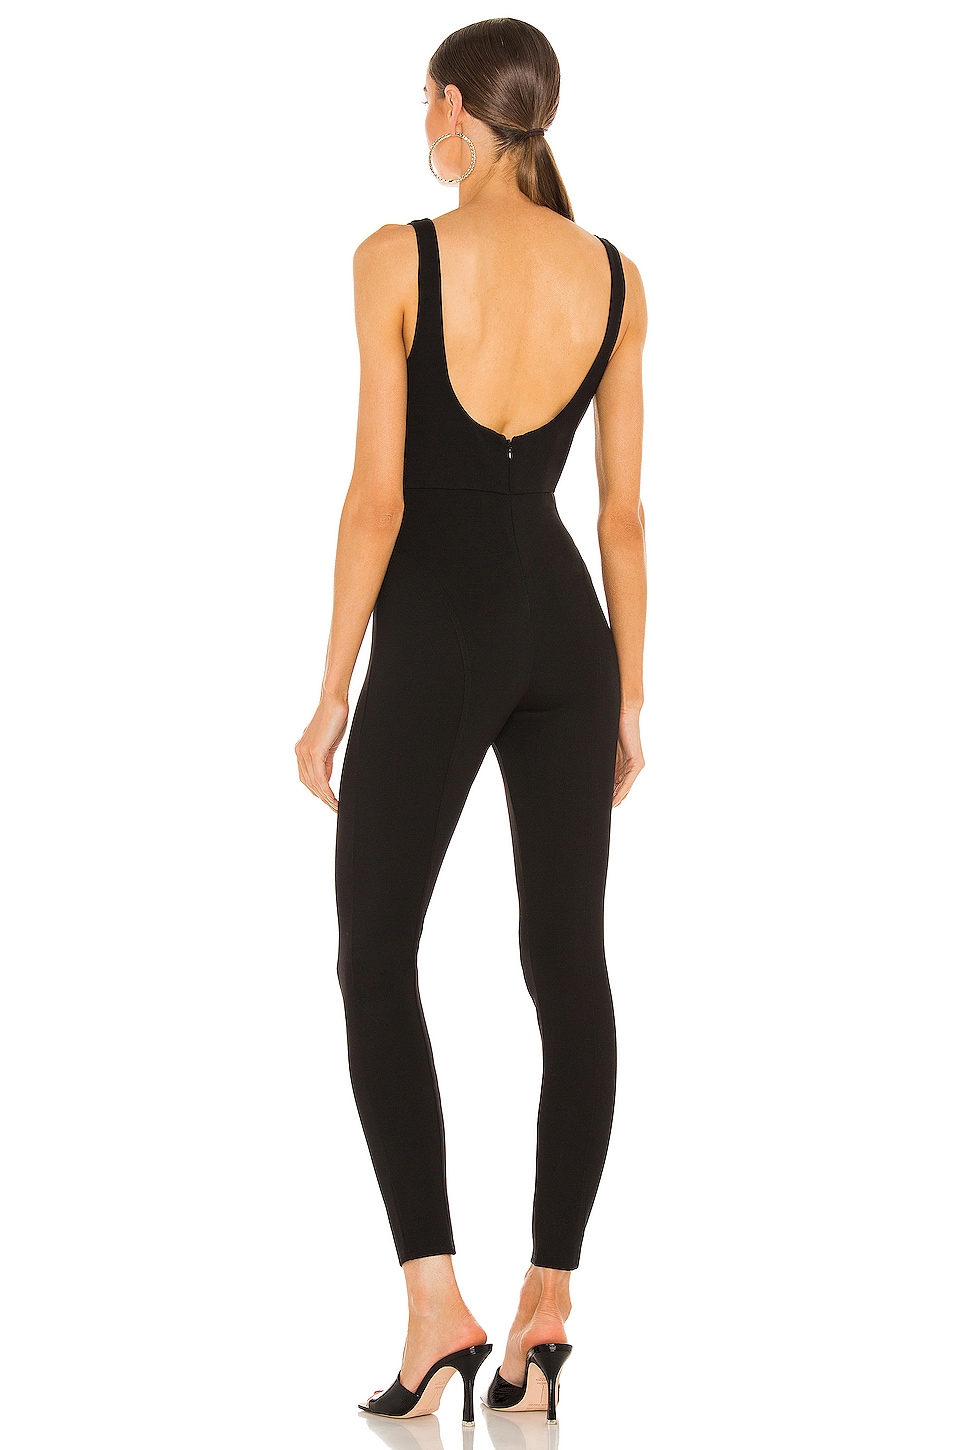 h:ours Robyn Catsuit Black